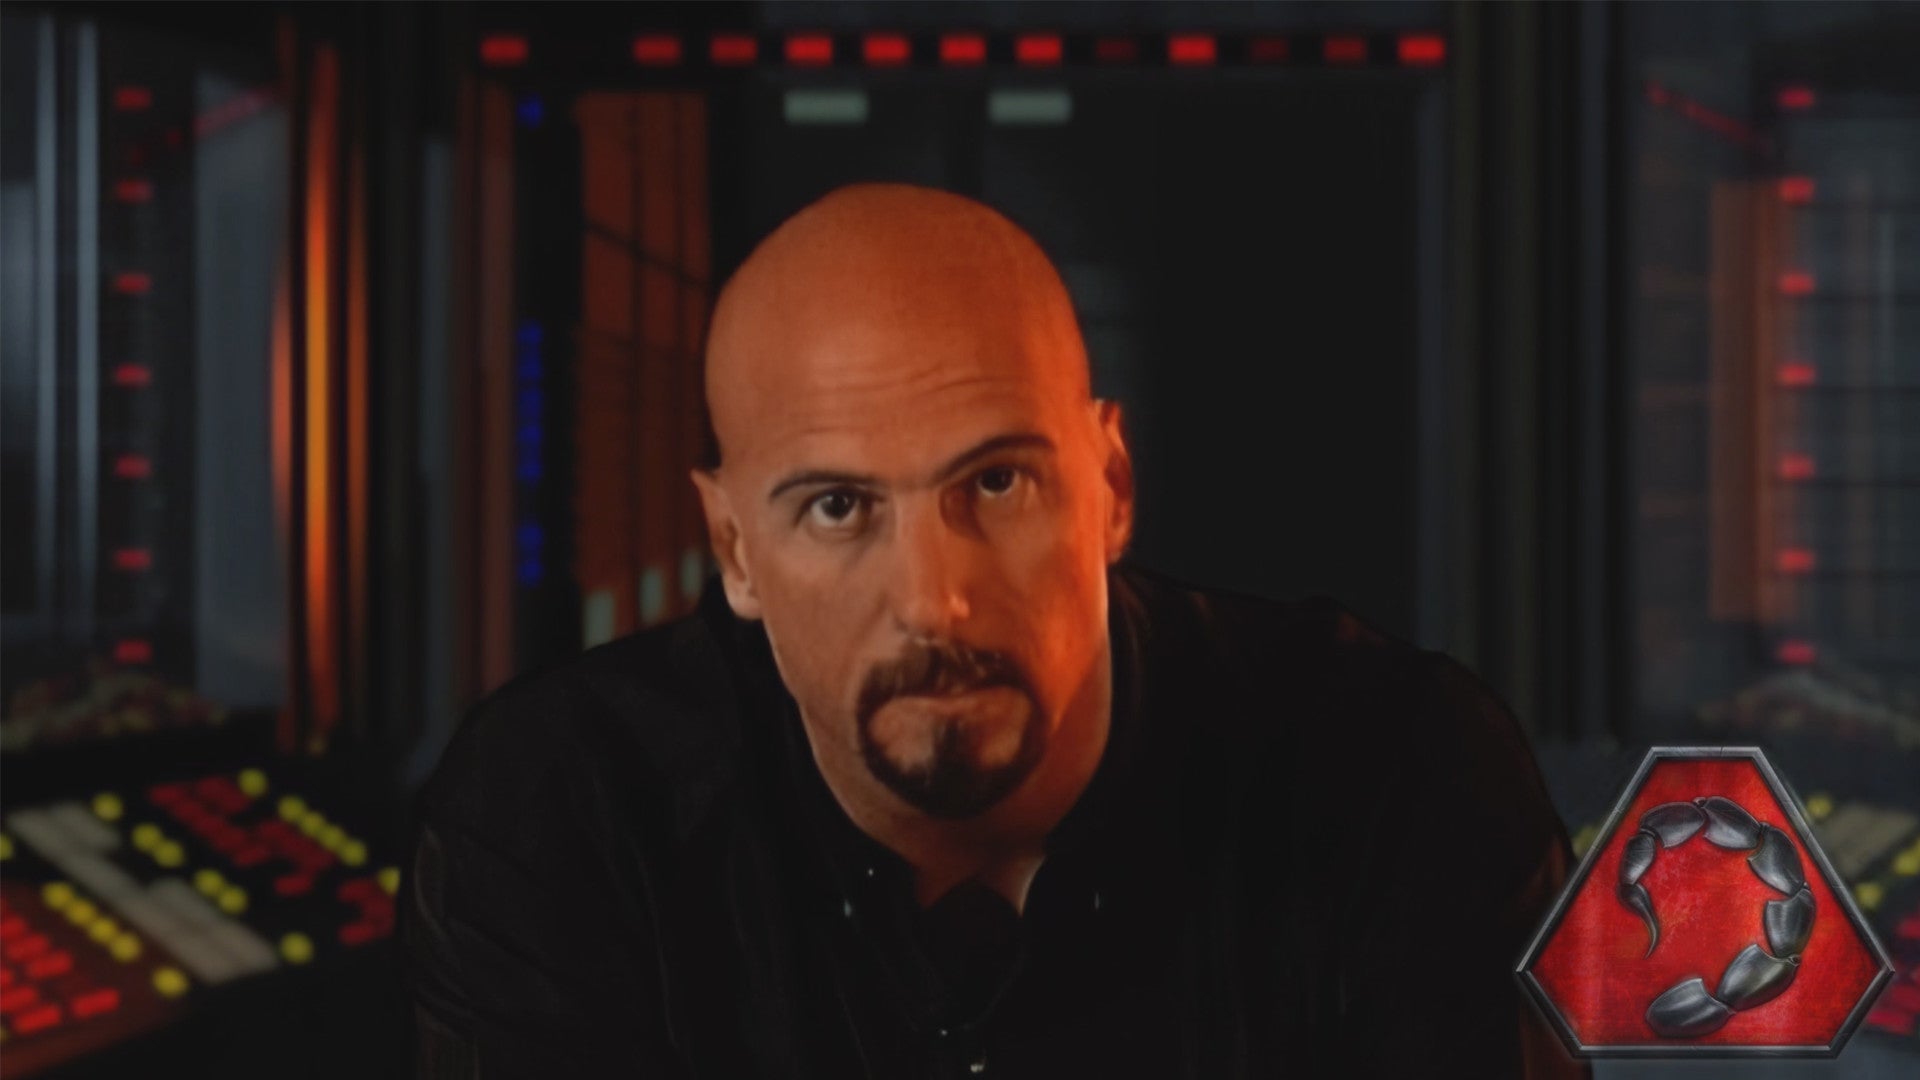 Kane from Command & Conquer stares intently into the camera during an FMV sequence